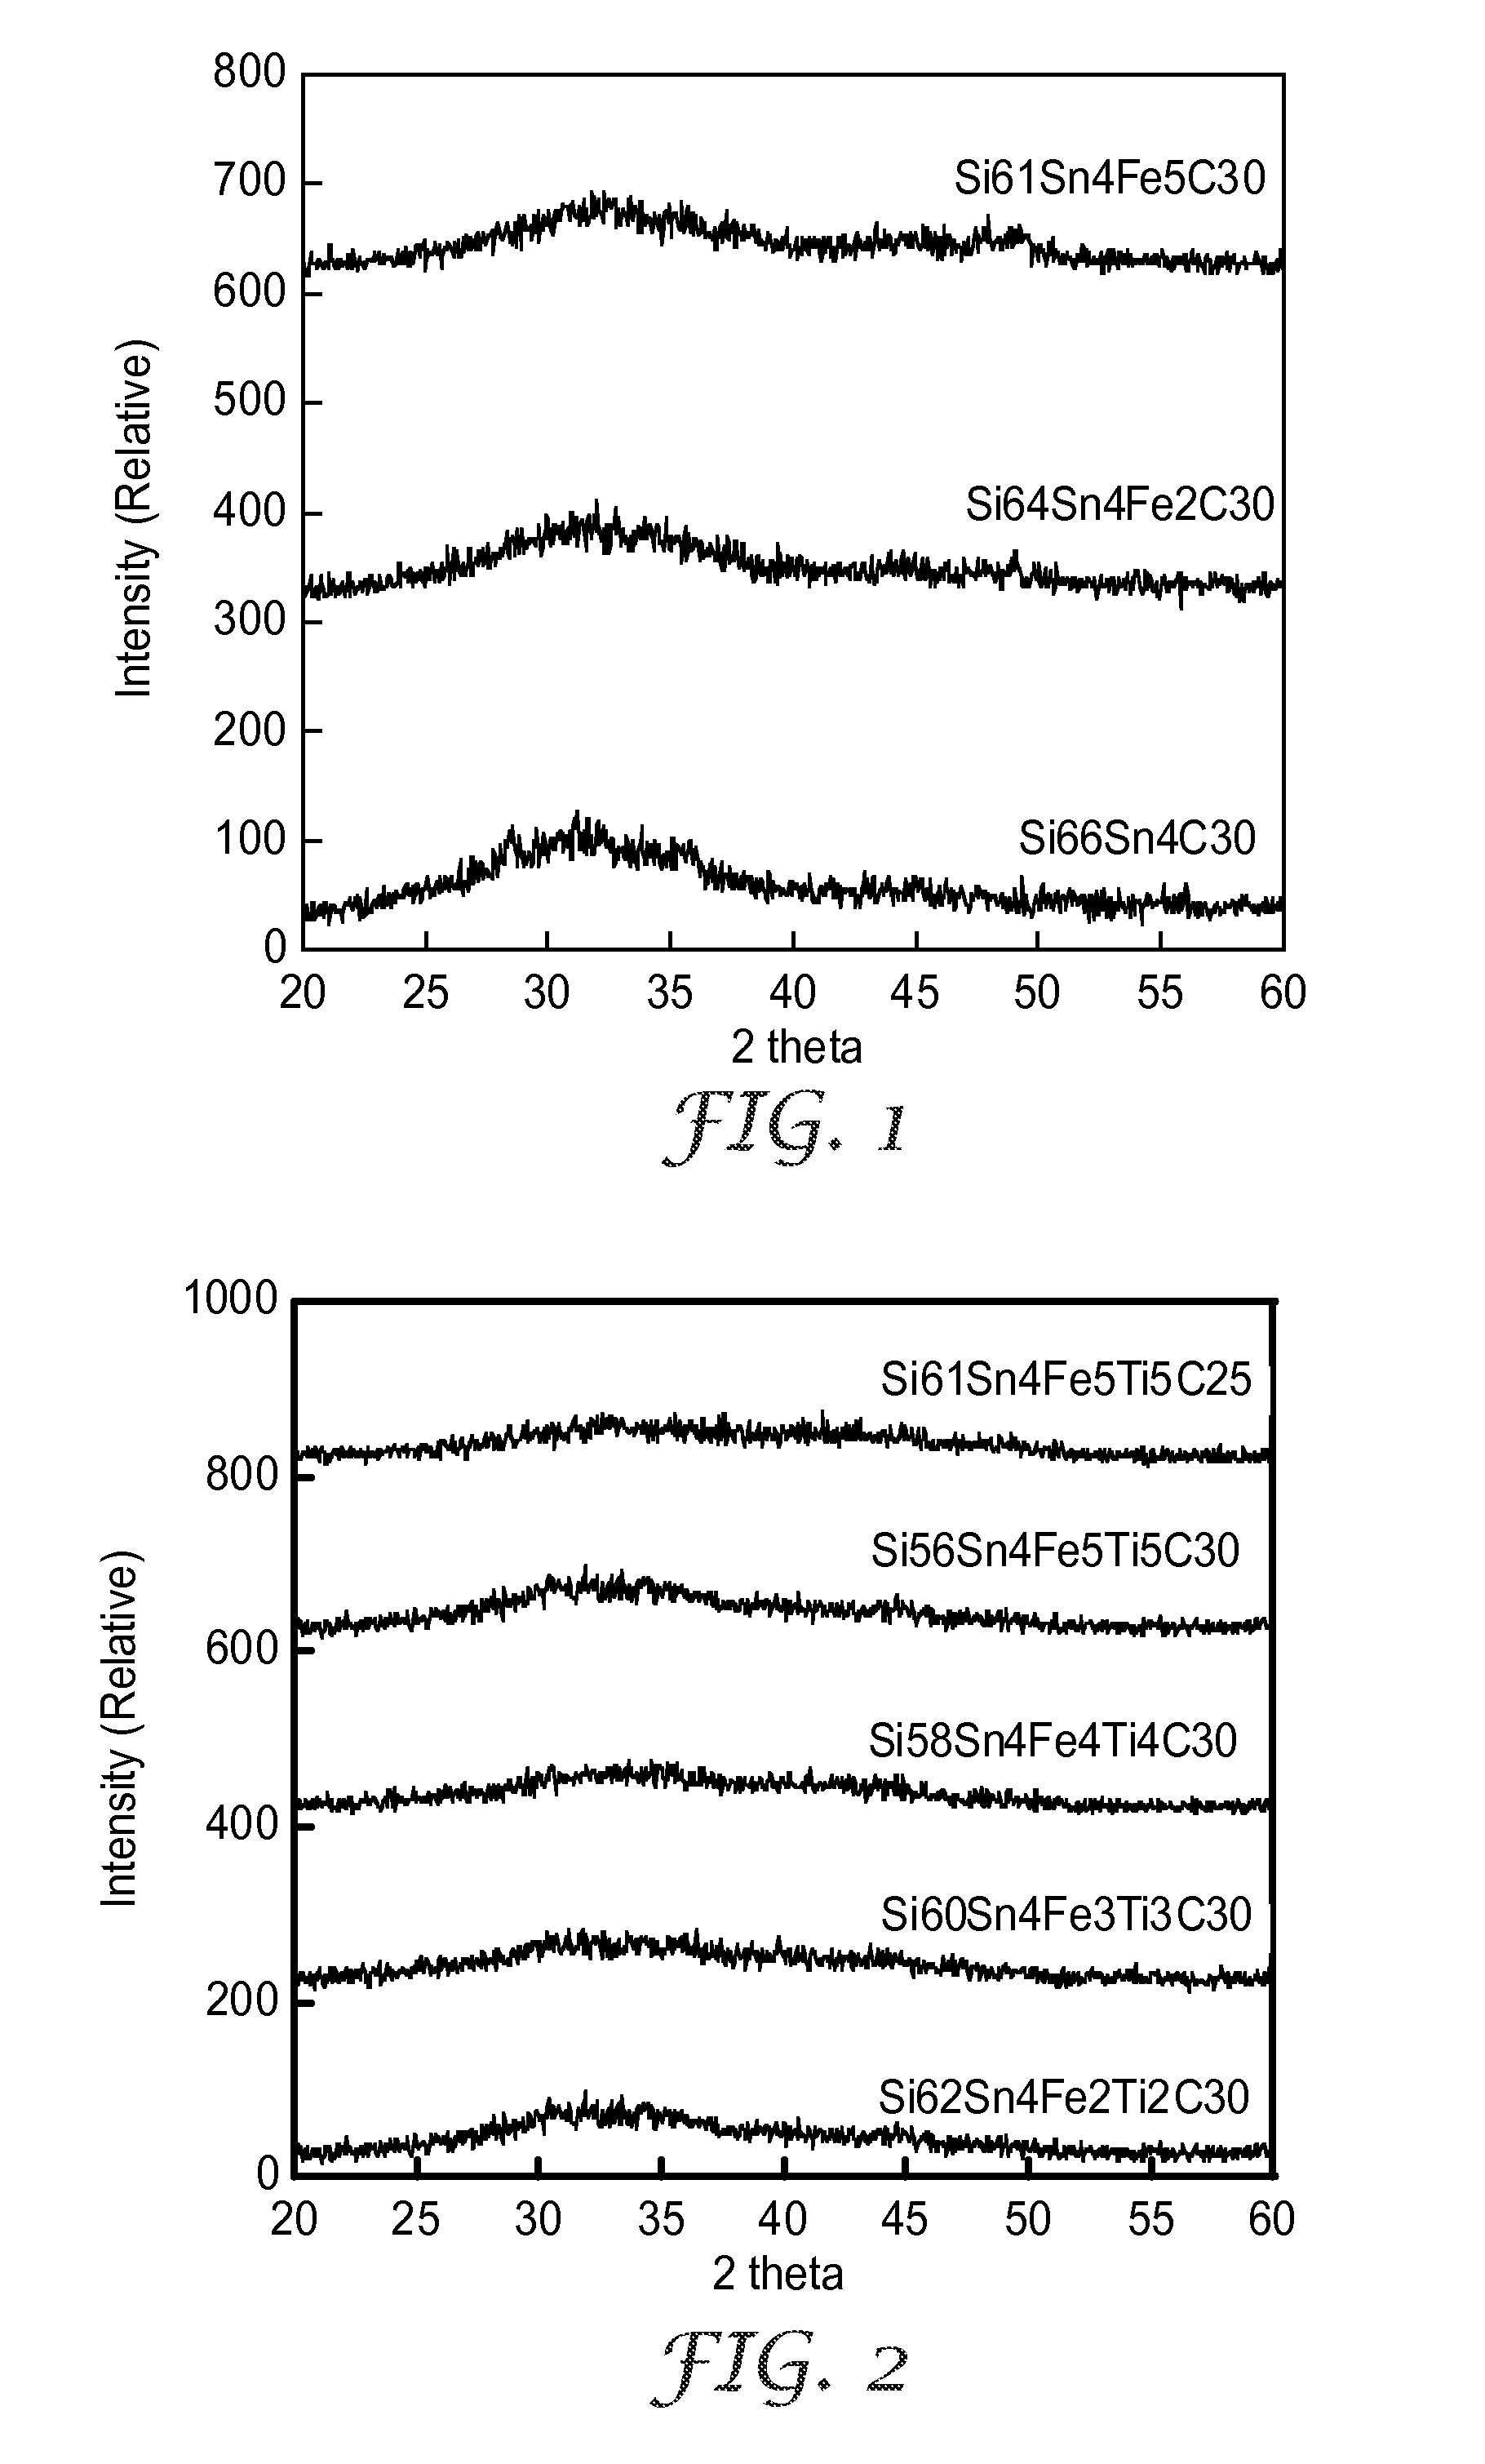 Amorphous alloy negative electrode compositions for lithium-ion electrochemical cells